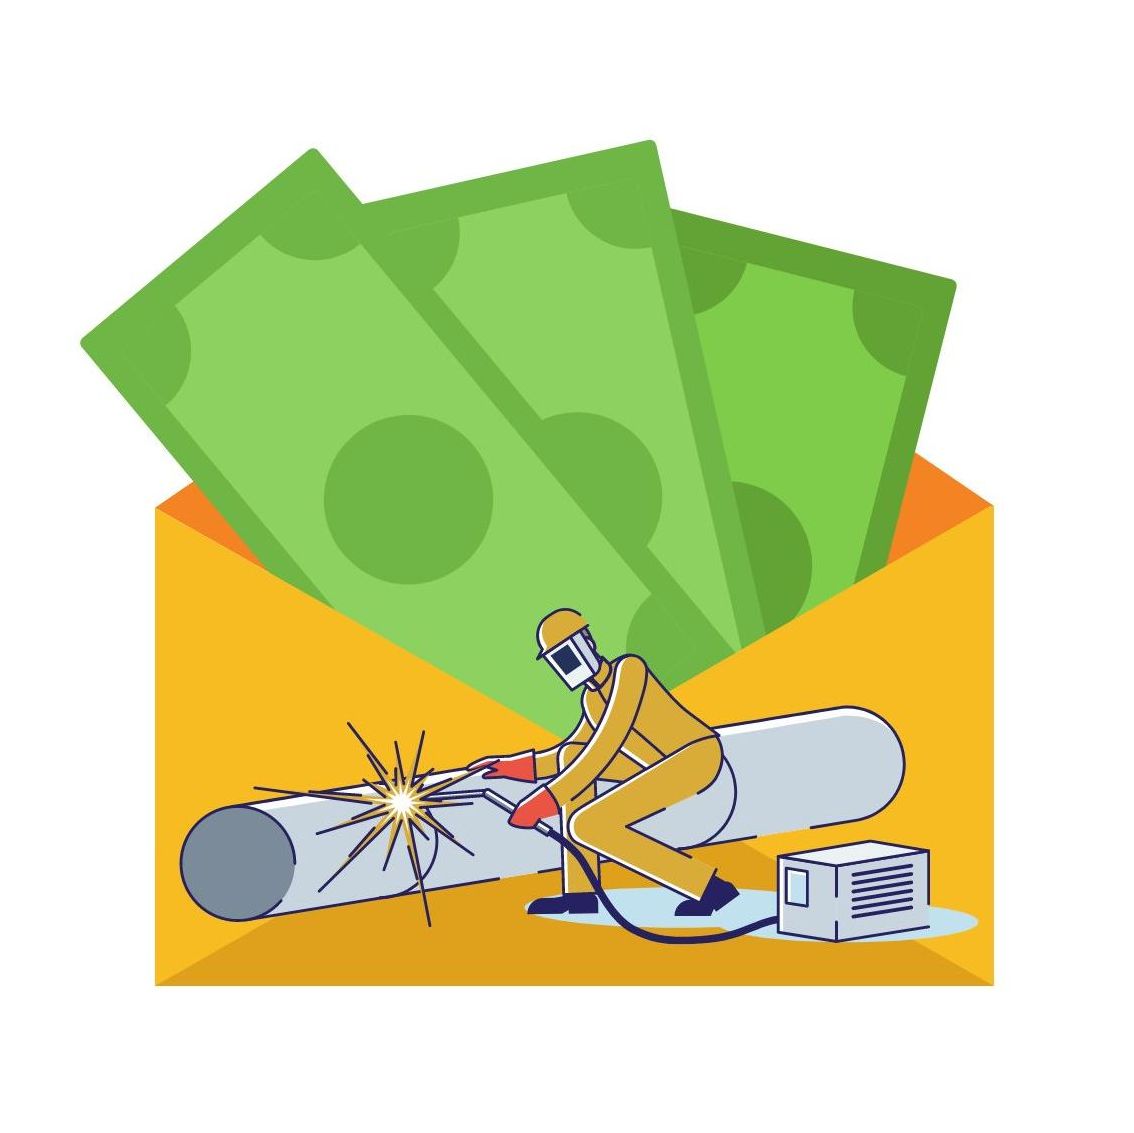 A graphical icon of money in the envelope and a pipe welder